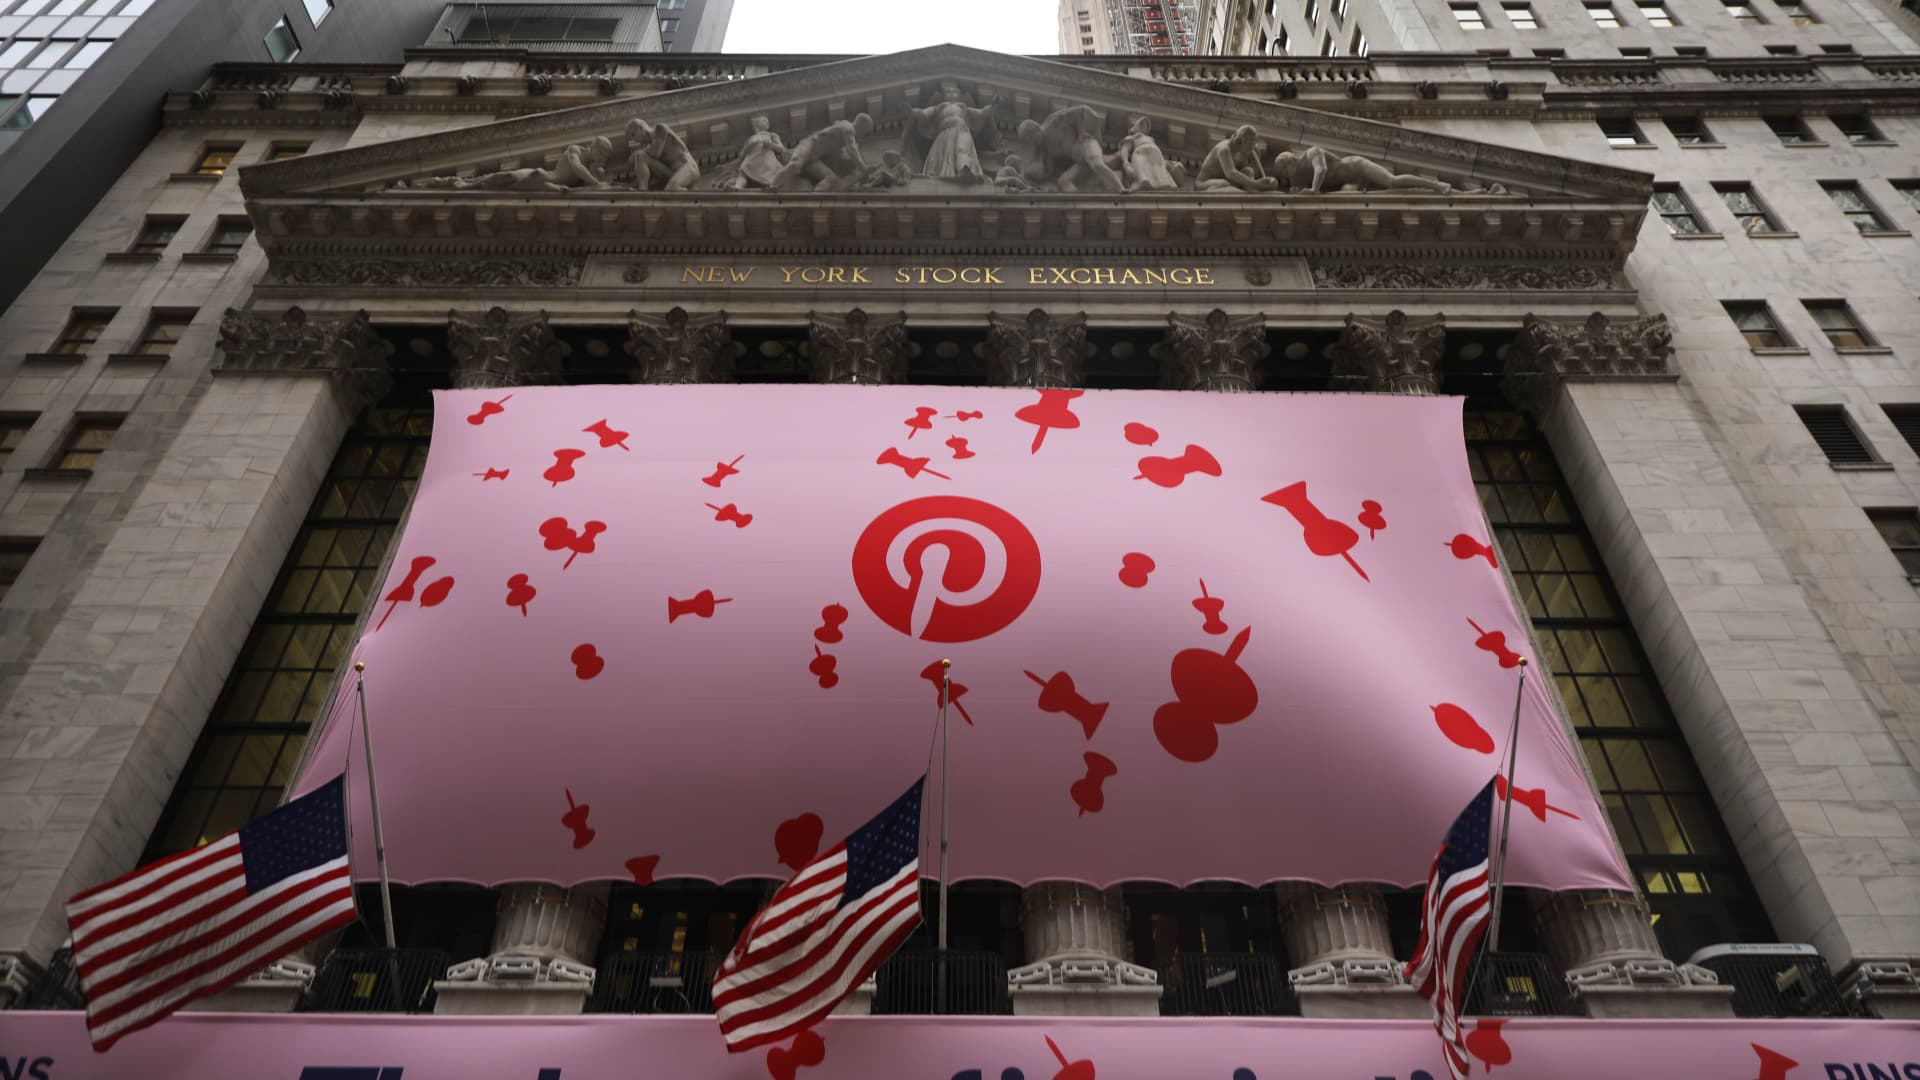 Pinterest improving boards to help people ‘take more action,’ CEO says